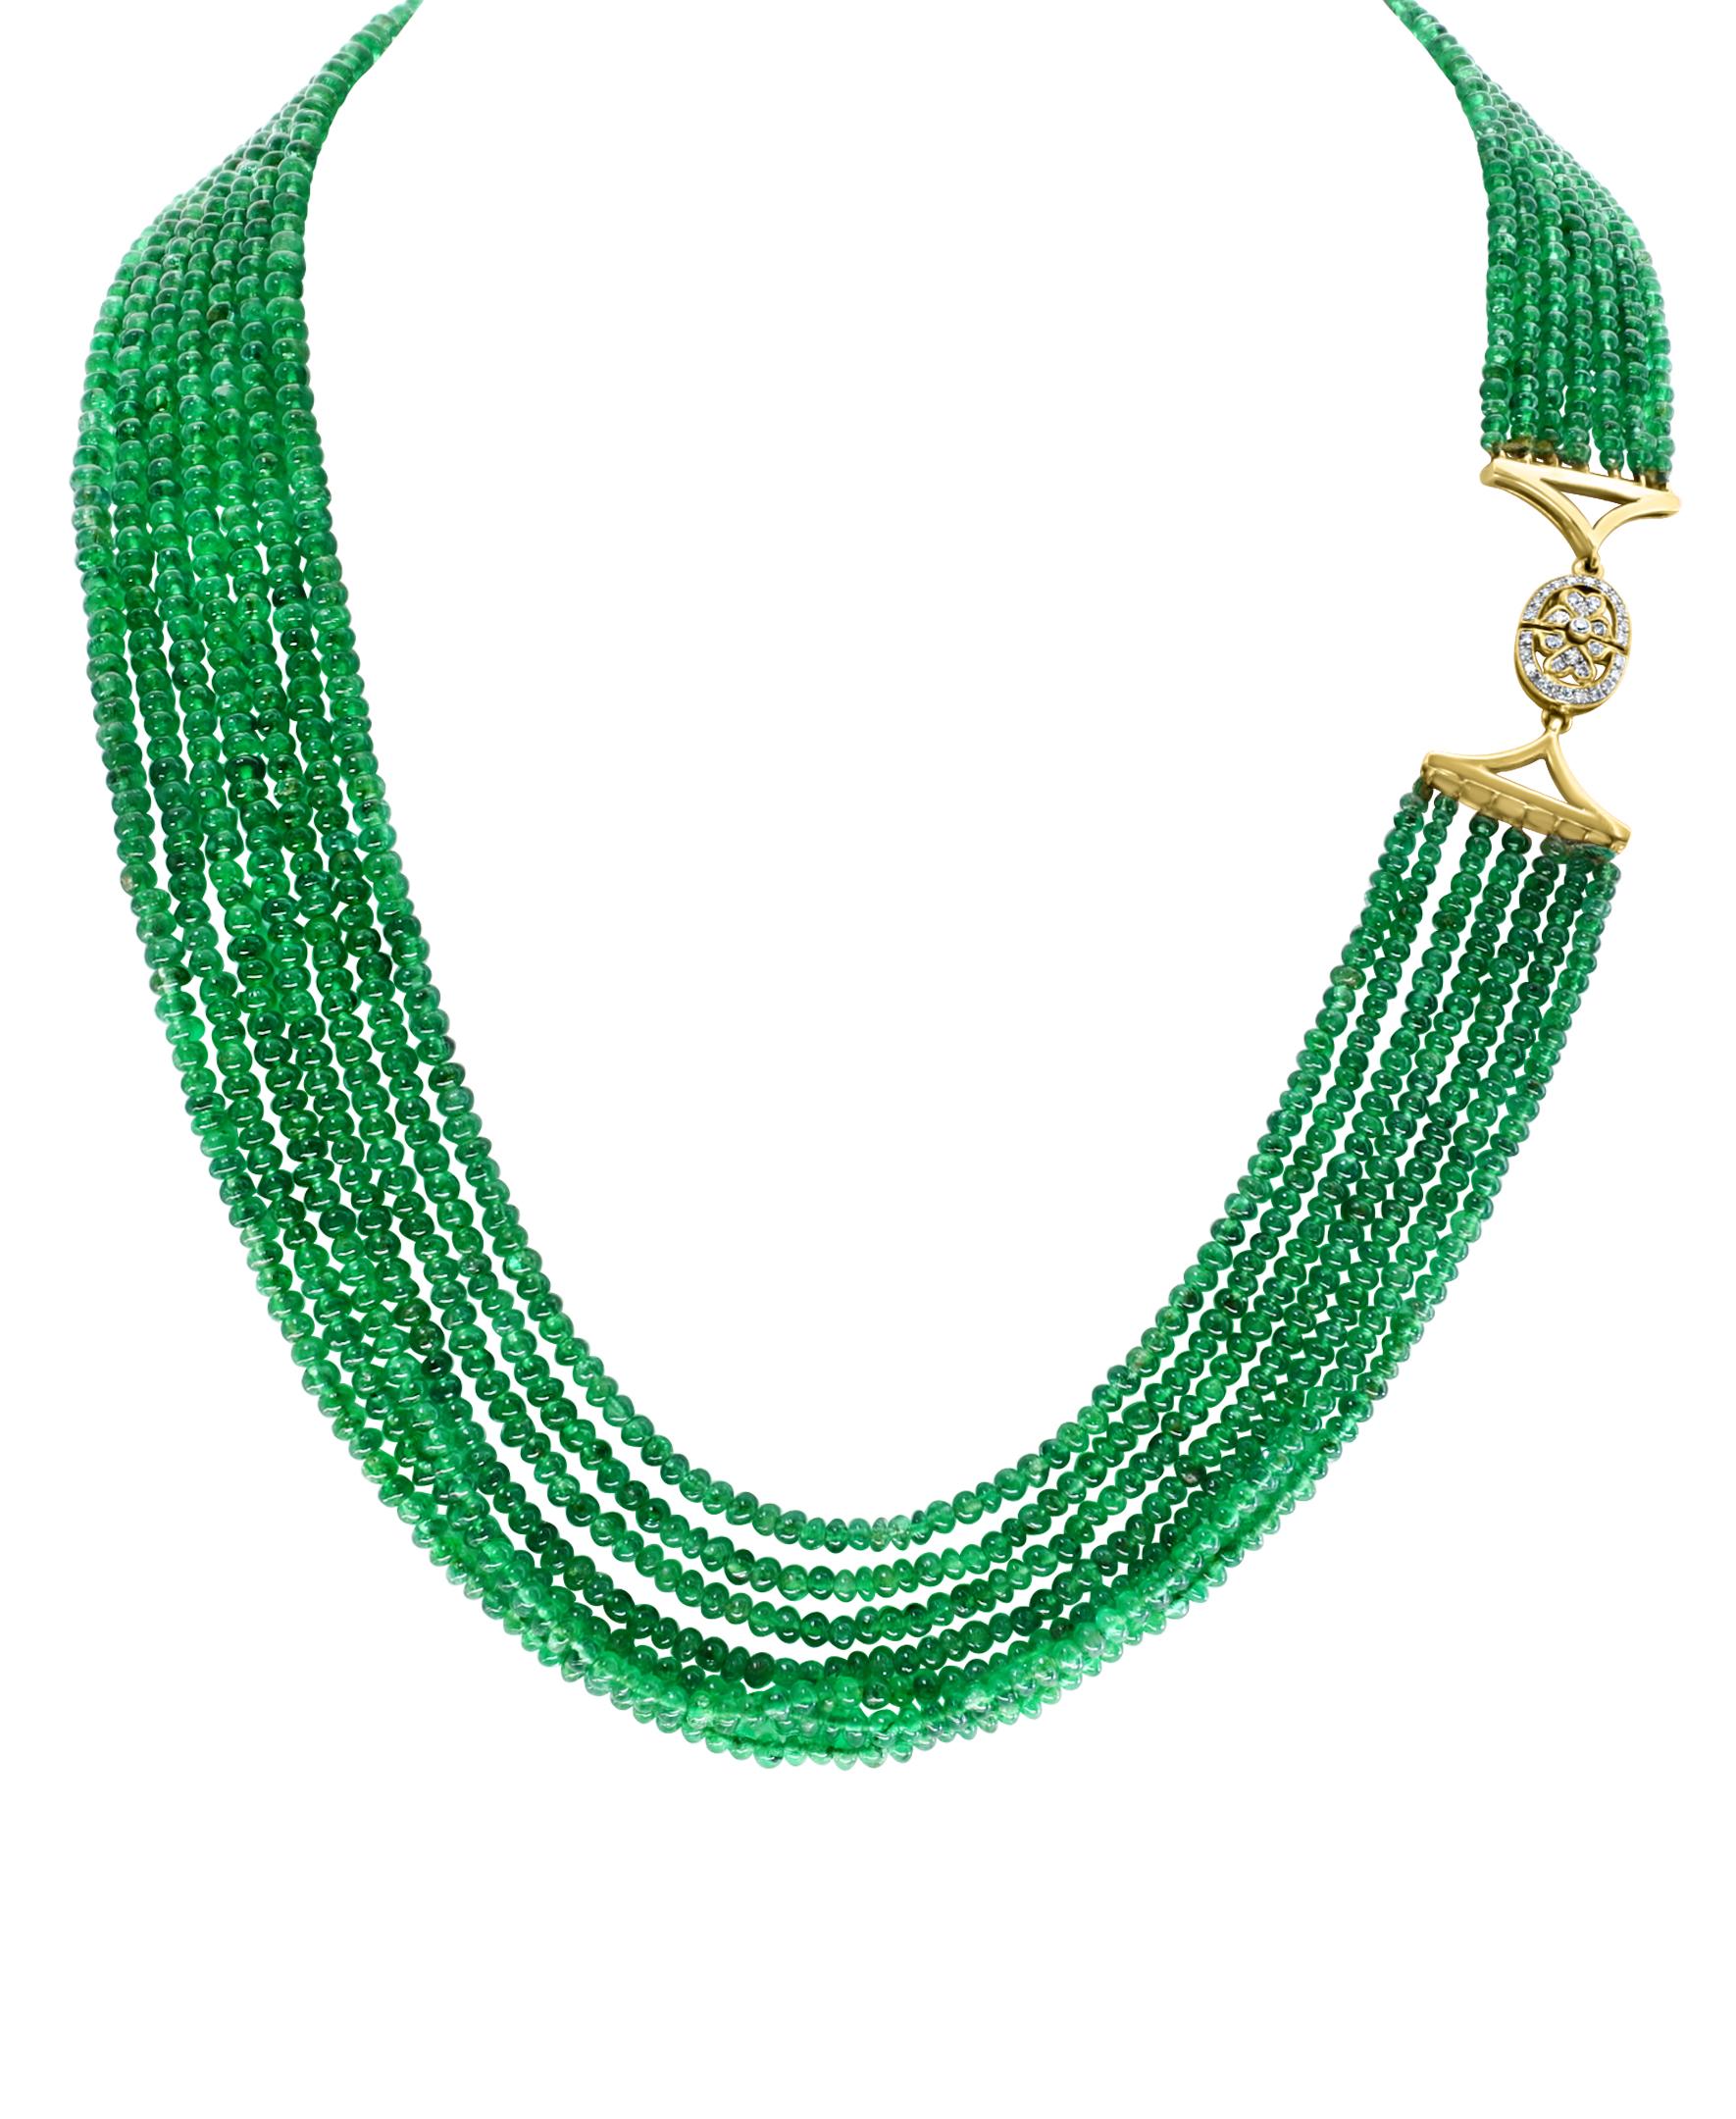 200 Carat  Emerald Beads 7 Line  Necklace With Diamond Clasp 18 Kt Yellow Gold 
This spectacular Necklace   consisting of approximately 200 Ct  of fine beads.
 There are 7 rows of fine Emerald Beads  
Total carat weight of diamonds  is 0.6 Ct,